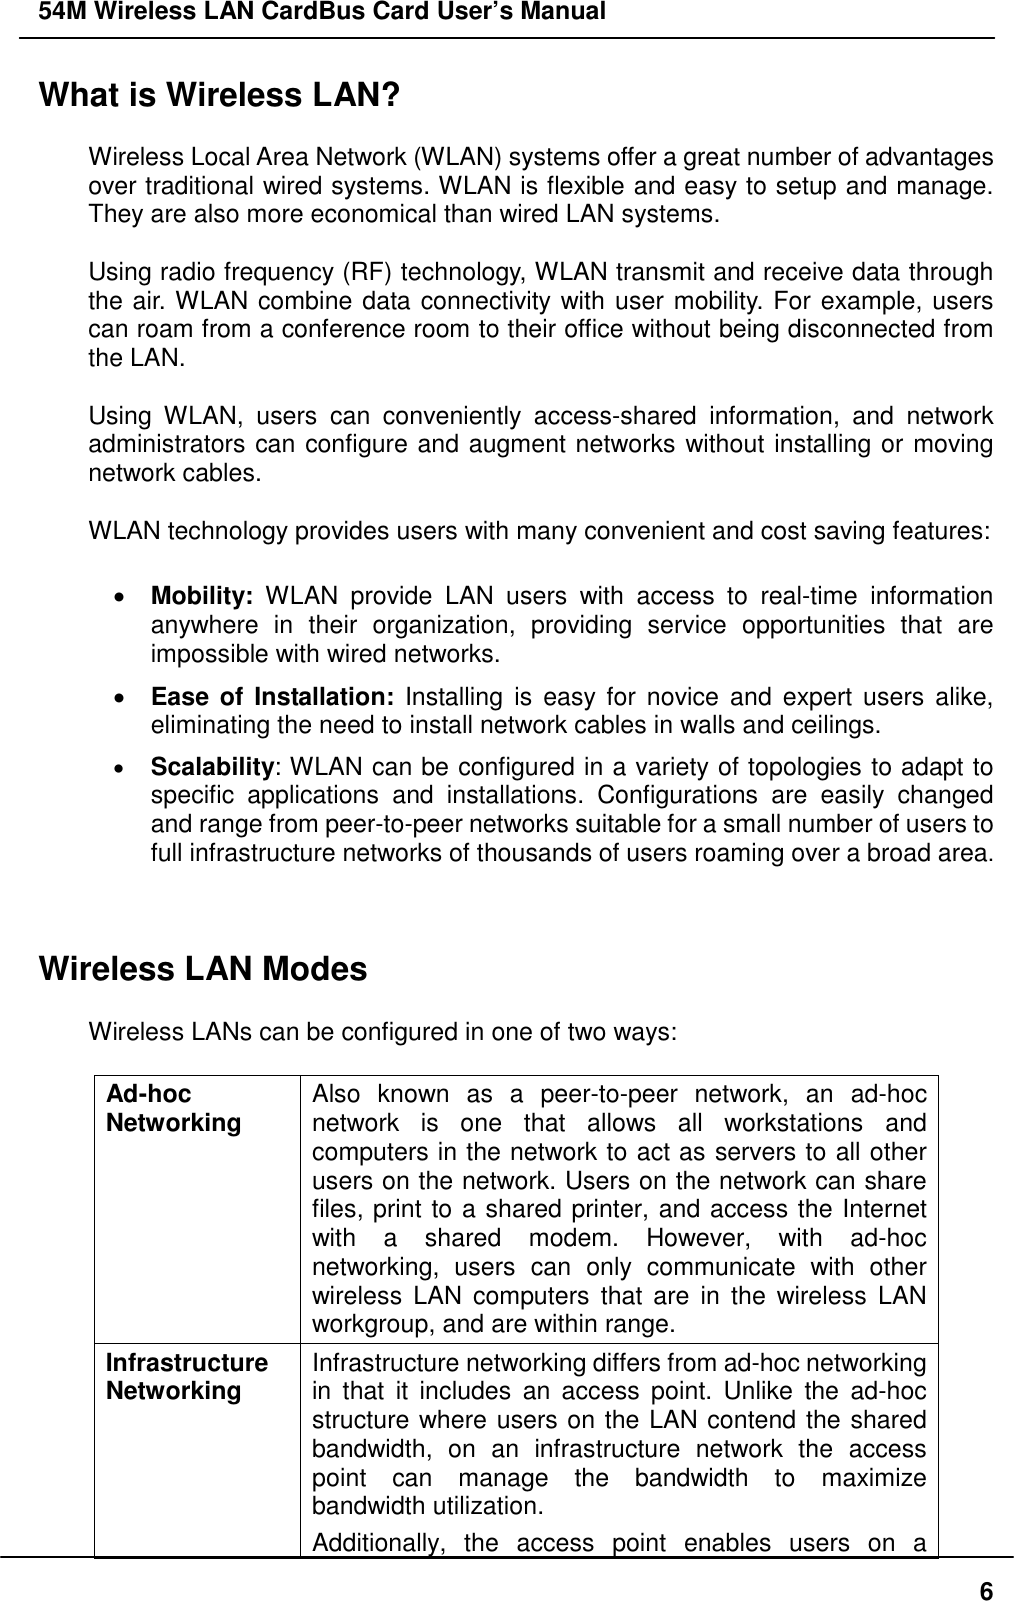 54M Wireless LAN CardBus Card User’s Manual6What is Wireless LAN?Wireless Local Area Network (WLAN) systems offer a great number of advantagesover traditional wired systems. WLAN is flexible and easy to setup and manage.They are also more economical than wired LAN systems.Using radio frequency (RF) technology, WLAN transmit and receive data throughthe air. WLAN combine data connectivity with user mobility. For example, userscan roam from a conference room to their office without being disconnected fromthe LAN.Using WLAN, users can conveniently access-shared information, and networkadministrators can configure and augment networks without installing or movingnetwork cables.WLAN technology provides users with many convenient and cost saving features:• Mobility: WLAN provide LAN users with access to real-time informationanywhere in their organization, providing service opportunities that areimpossible with wired networks.• Ease of Installation: Installing is easy for novice and expert users alike,eliminating the need to install network cables in walls and ceilings.• Scalability: WLAN can be configured in a variety of topologies to adapt tospecific applications and installations. Configurations are easily changedand range from peer-to-peer networks suitable for a small number of users tofull infrastructure networks of thousands of users roaming over a broad area.Wireless LAN ModesWireless LANs can be configured in one of two ways:Ad-hocNetworking Also known as a peer-to-peer network, an ad-hocnetwork is one that allows all workstations andcomputers in the network to act as servers to all otherusers on the network. Users on the network can sharefiles, print to a shared printer, and access the Internetwith a shared modem. However, with ad-hocnetworking, users can only communicate with otherwireless LAN computers that are in the wireless LANworkgroup, and are within range.InfrastructureNetworking Infrastructure networking differs from ad-hoc networkingin that it includes an access point. Unlike the ad-hocstructure where users on the LAN contend the sharedbandwidth, on an infrastructure network the accesspoint can manage the bandwidth to maximizebandwidth utilization.Additionally, the access point enables users on a